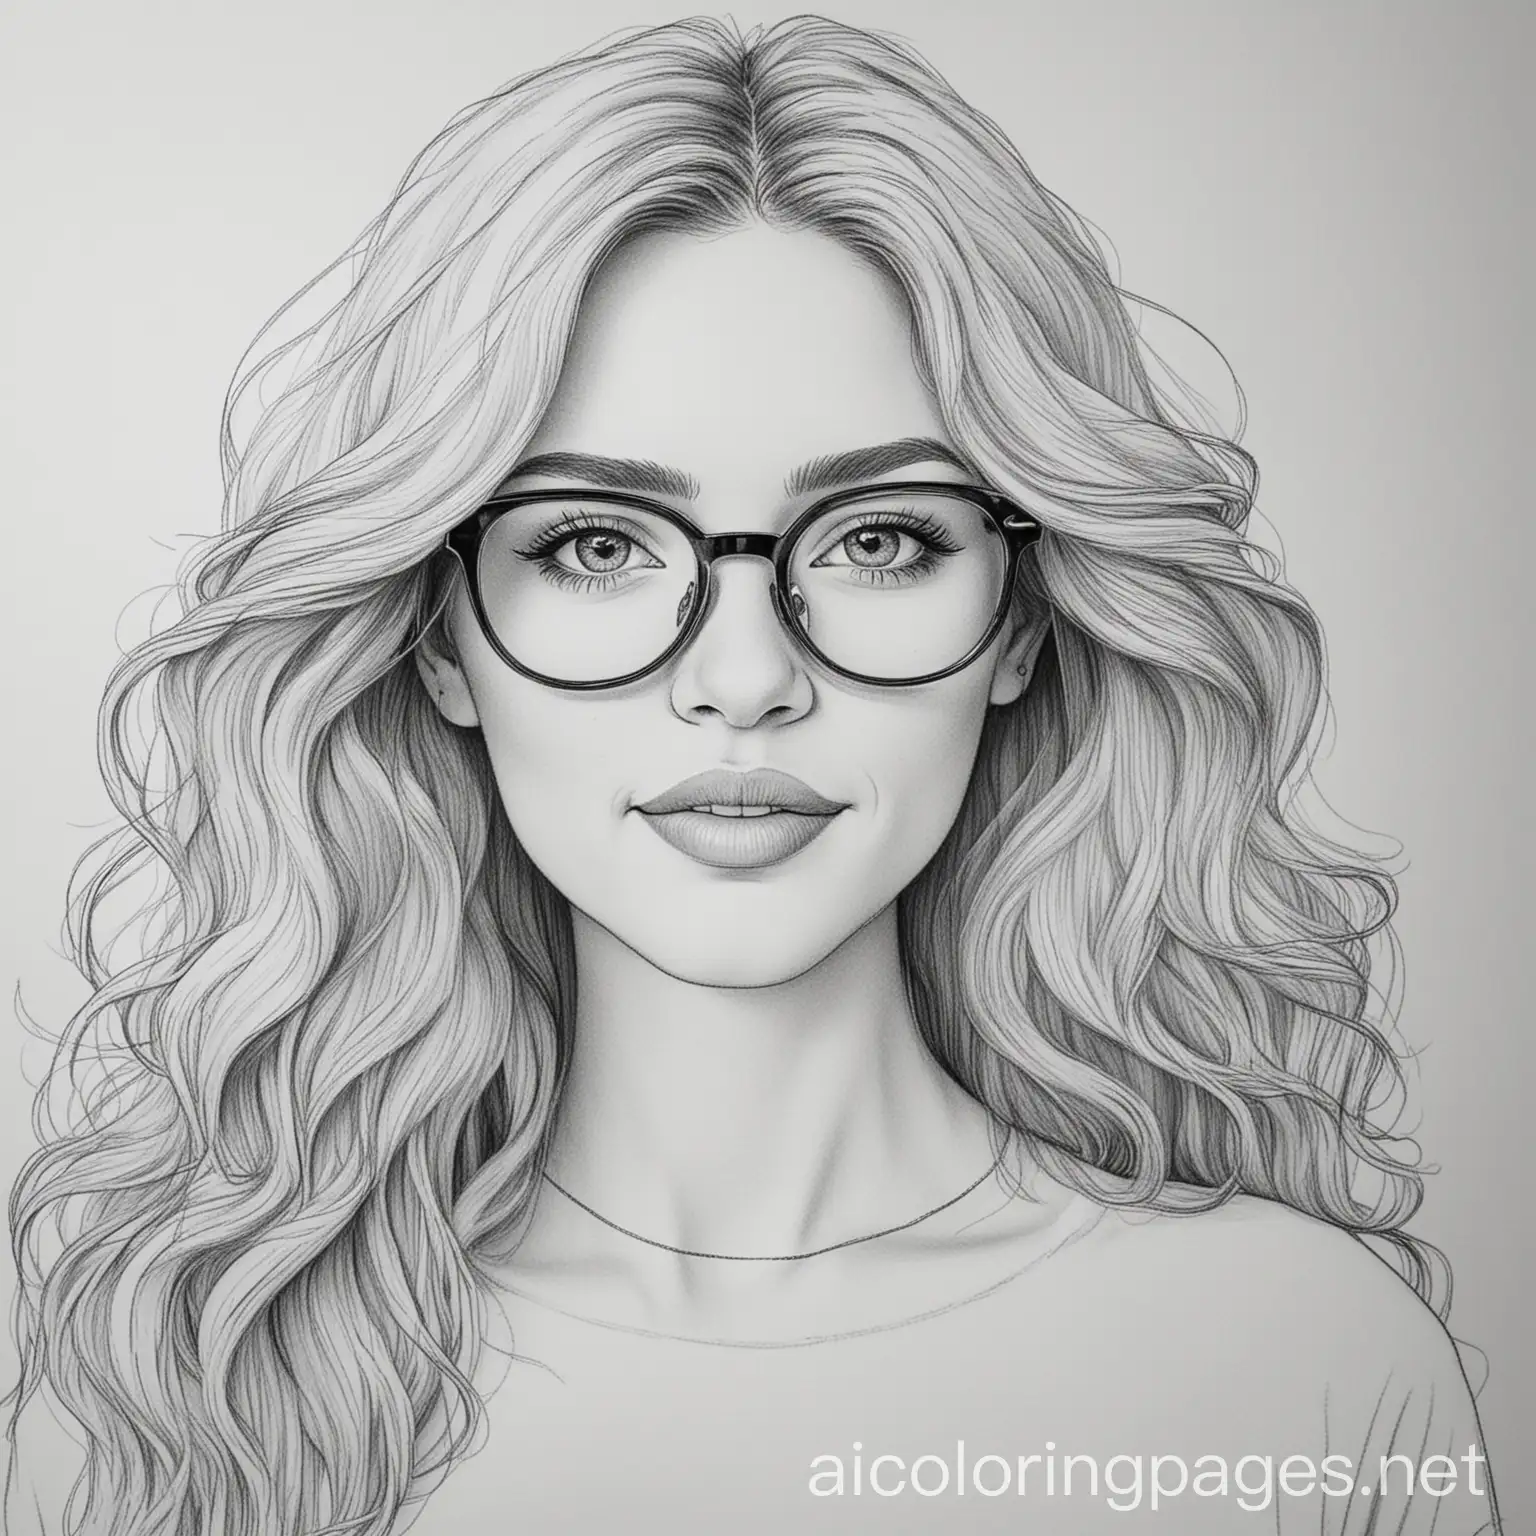 realistic woman with long wavy hair and glasses, Coloring Page, black and white, line art, white background, Simplicity, Ample White Space. The background of the coloring page is plain white to make it easy for young children to color within the lines. The outlines of all the subjects are easy to distinguish, making it simple for kids to color without too much difficulty